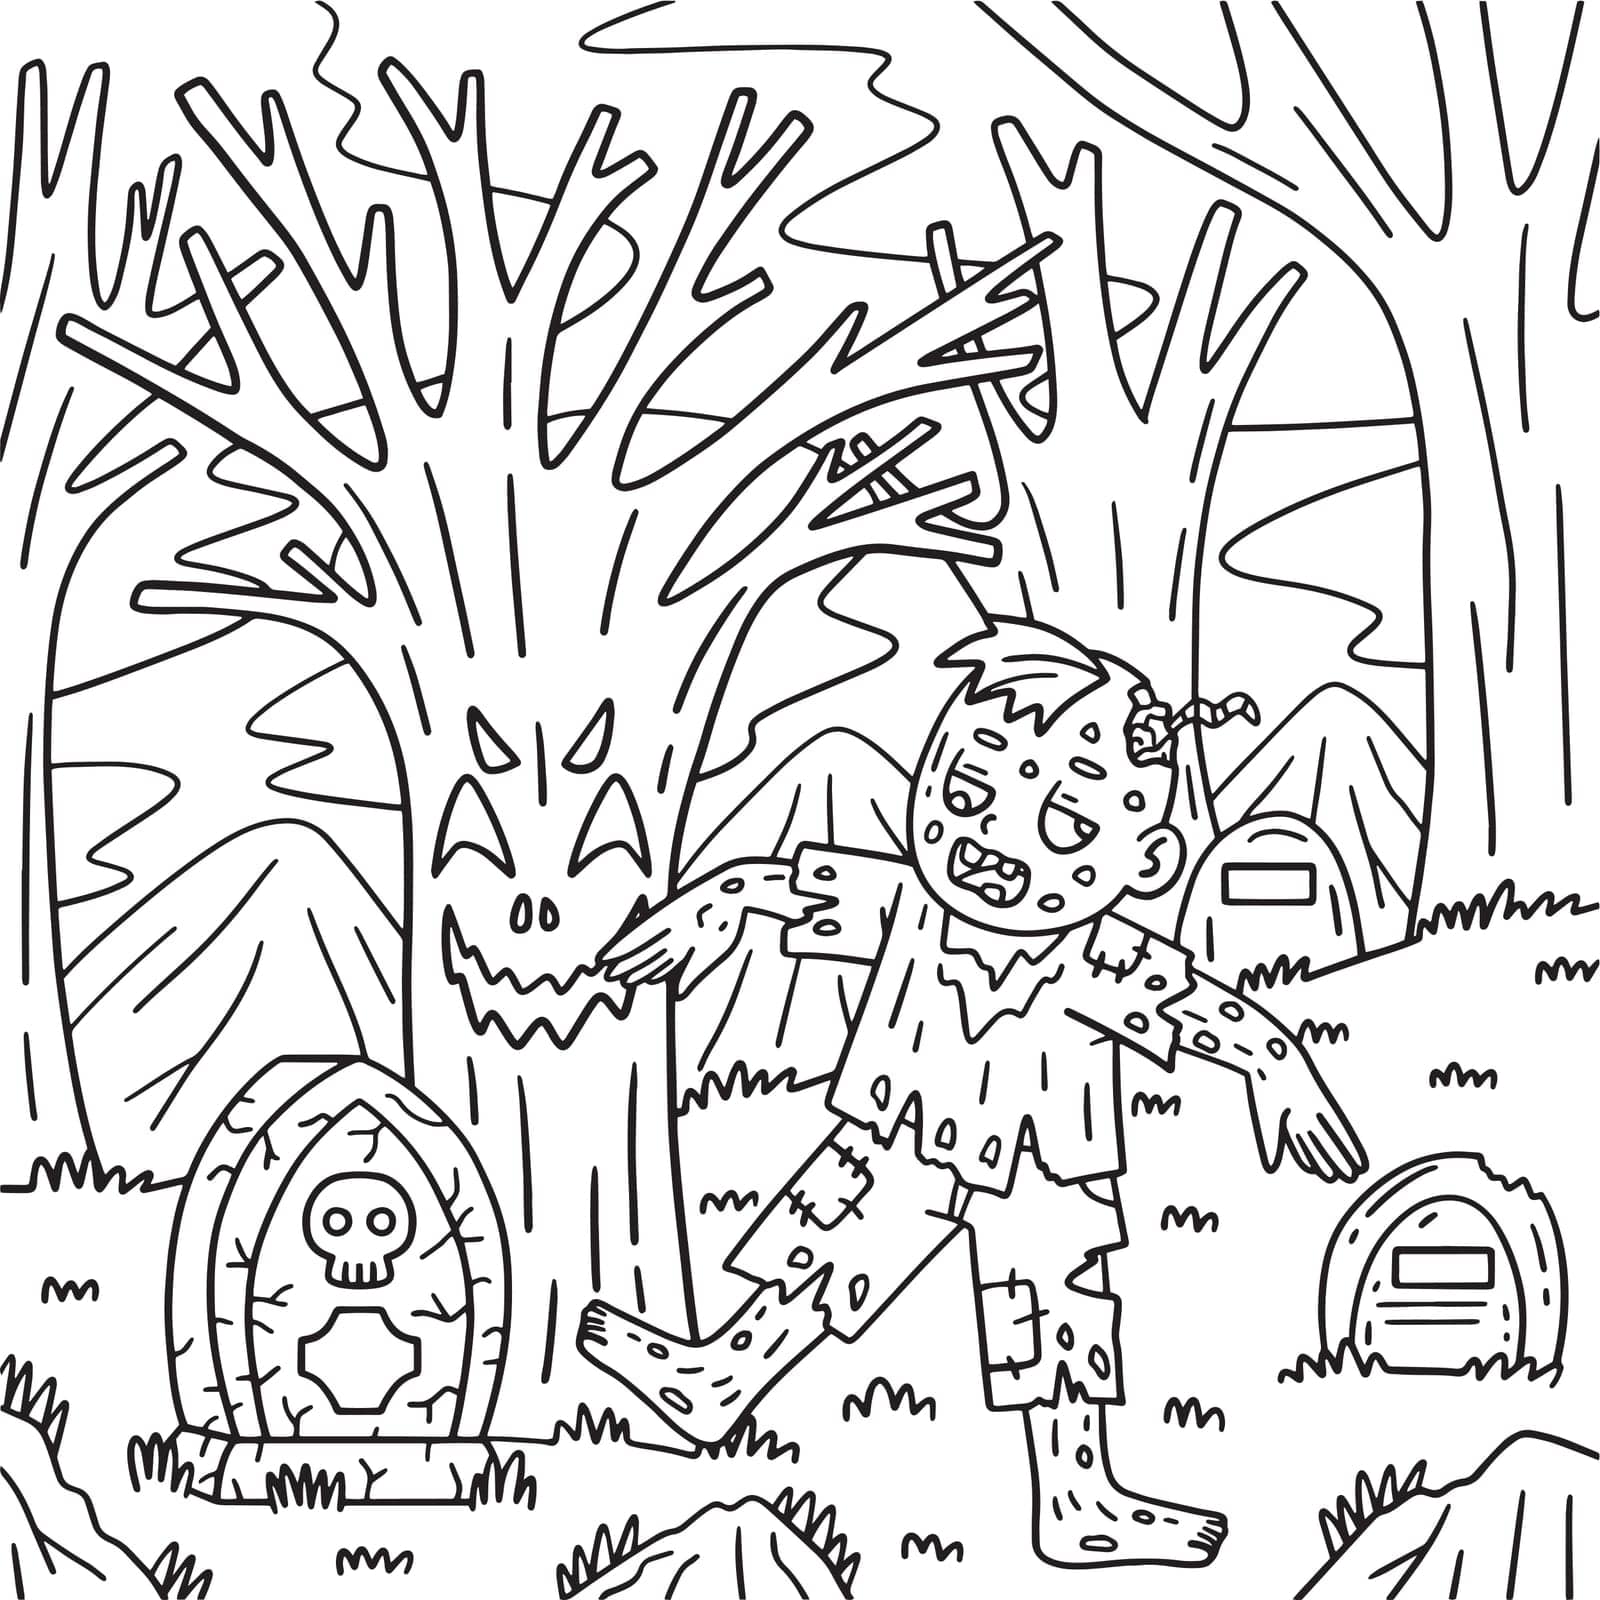 Zombie under a Spooky Tree Coloring Pages for Kids by abbydesign